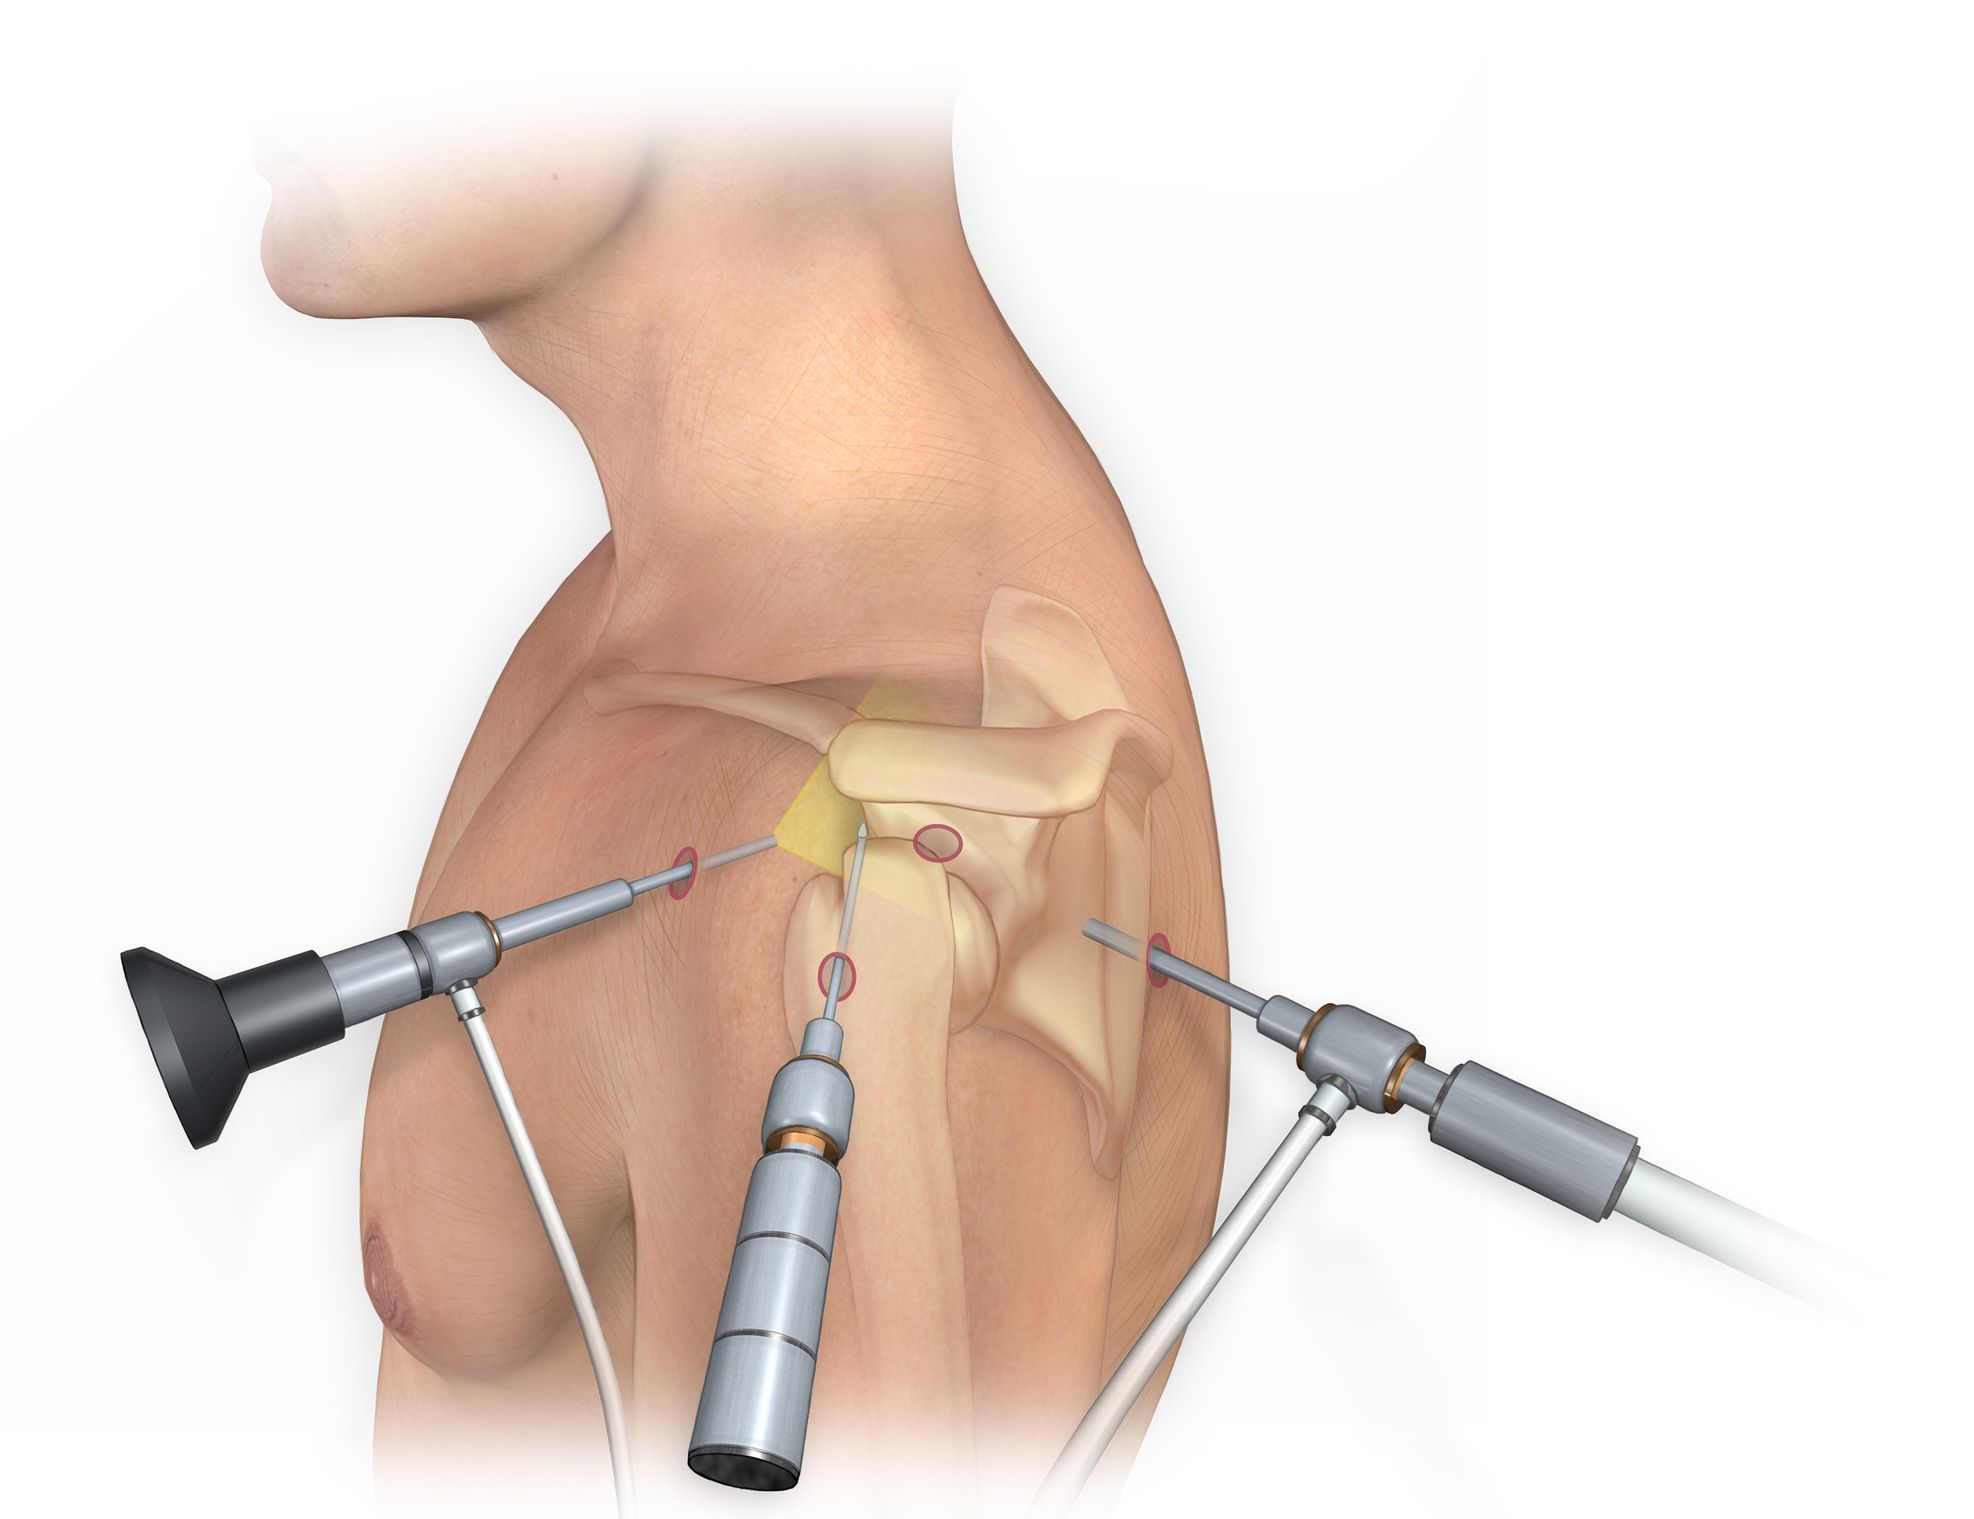 Arthroscopy Devices Market Driven by Increase in Procedures to Reach $10.5 Billion by 2031